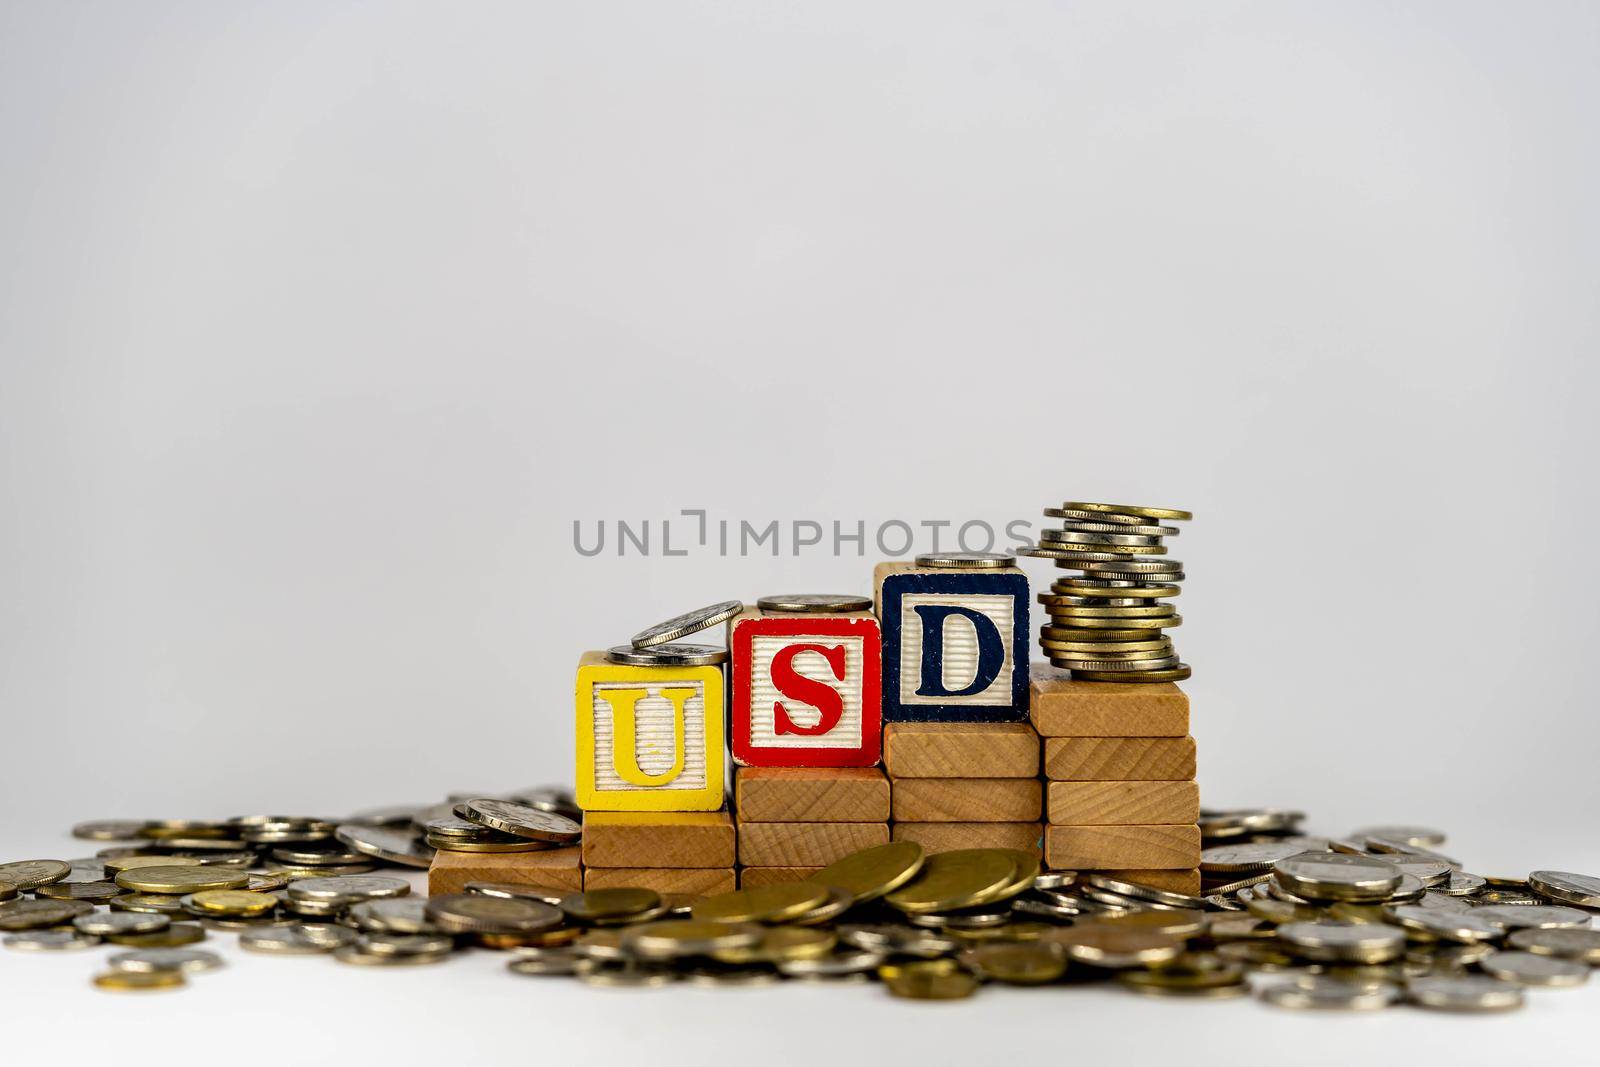 Forex USD concept with wooden blocks and coins. Forx USD letters on wooden blocks sorrounded with money